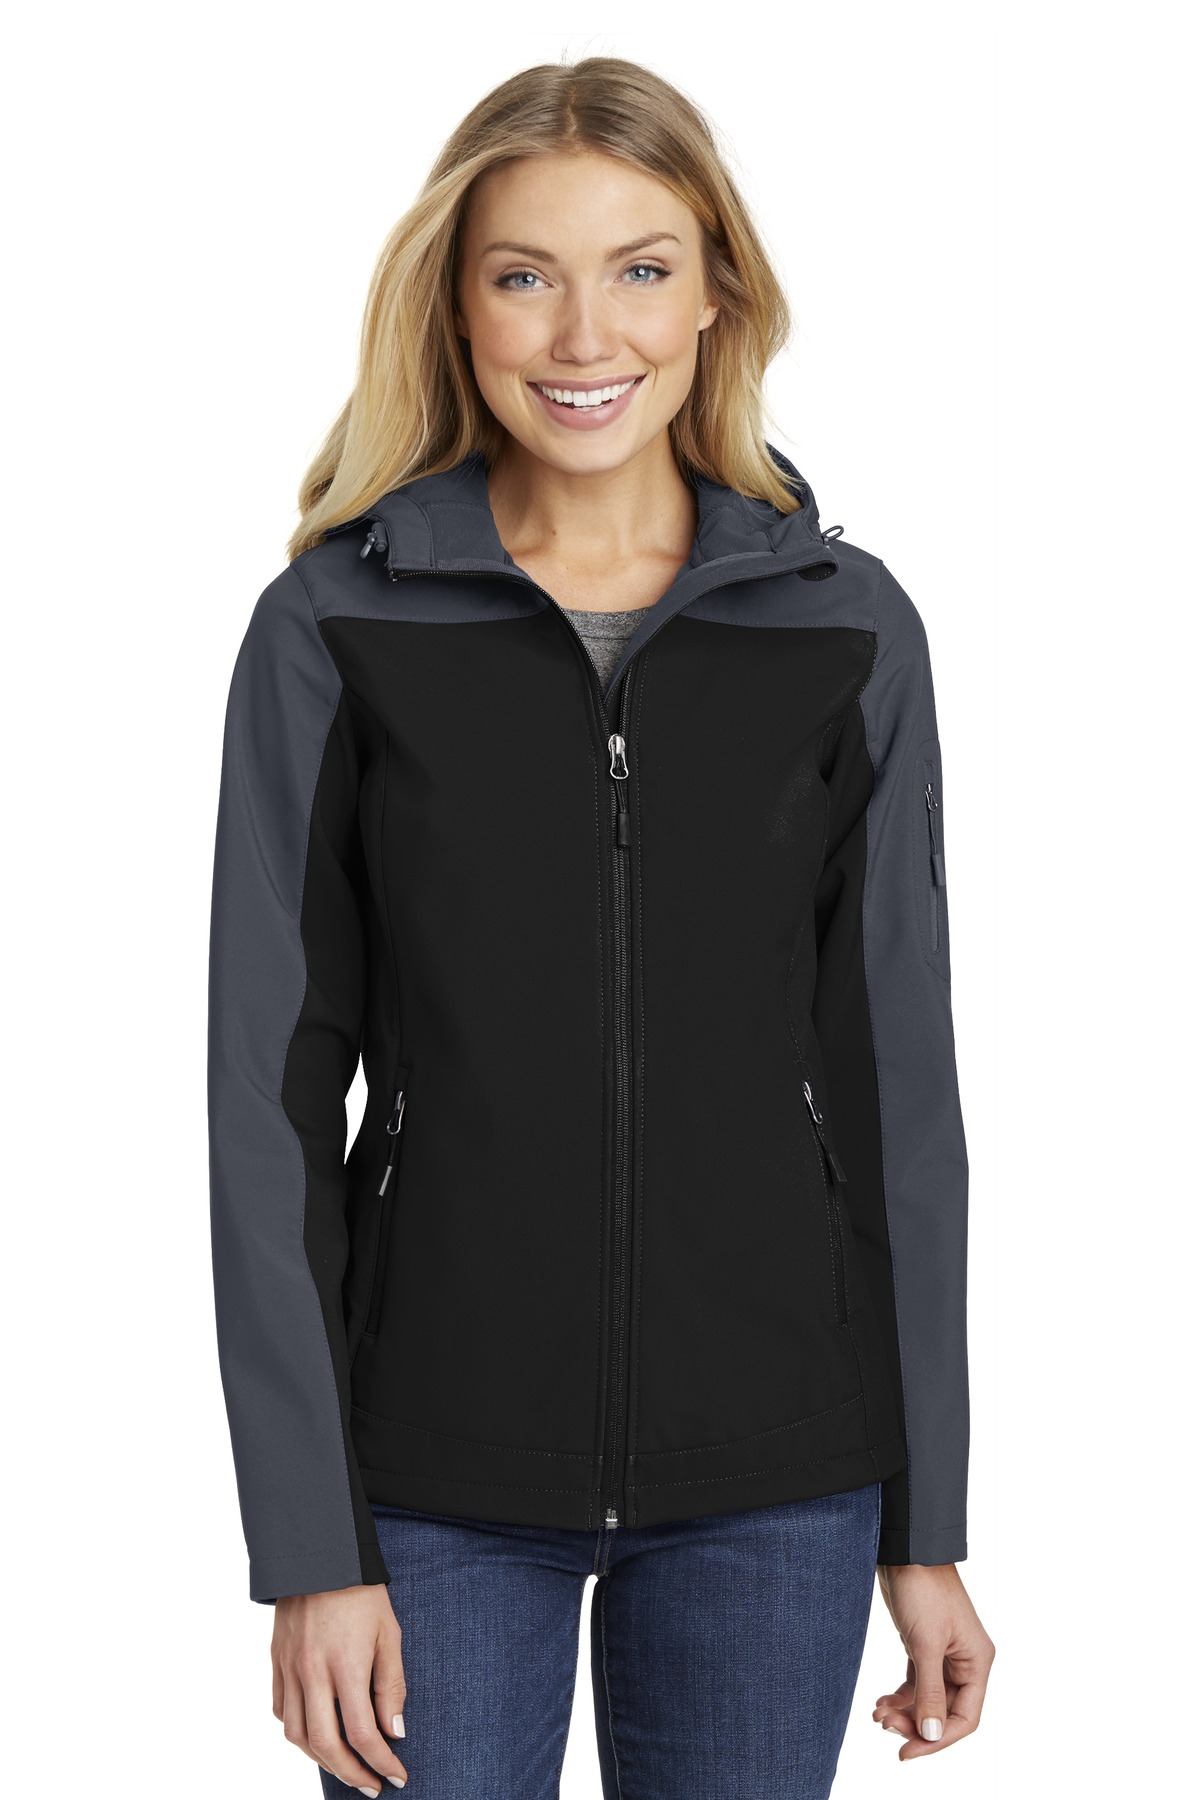 Port Authority Ladies Outerwear for Hospitality ® Ladies Hooded Core Soft Shell Jacket.-Port Authority